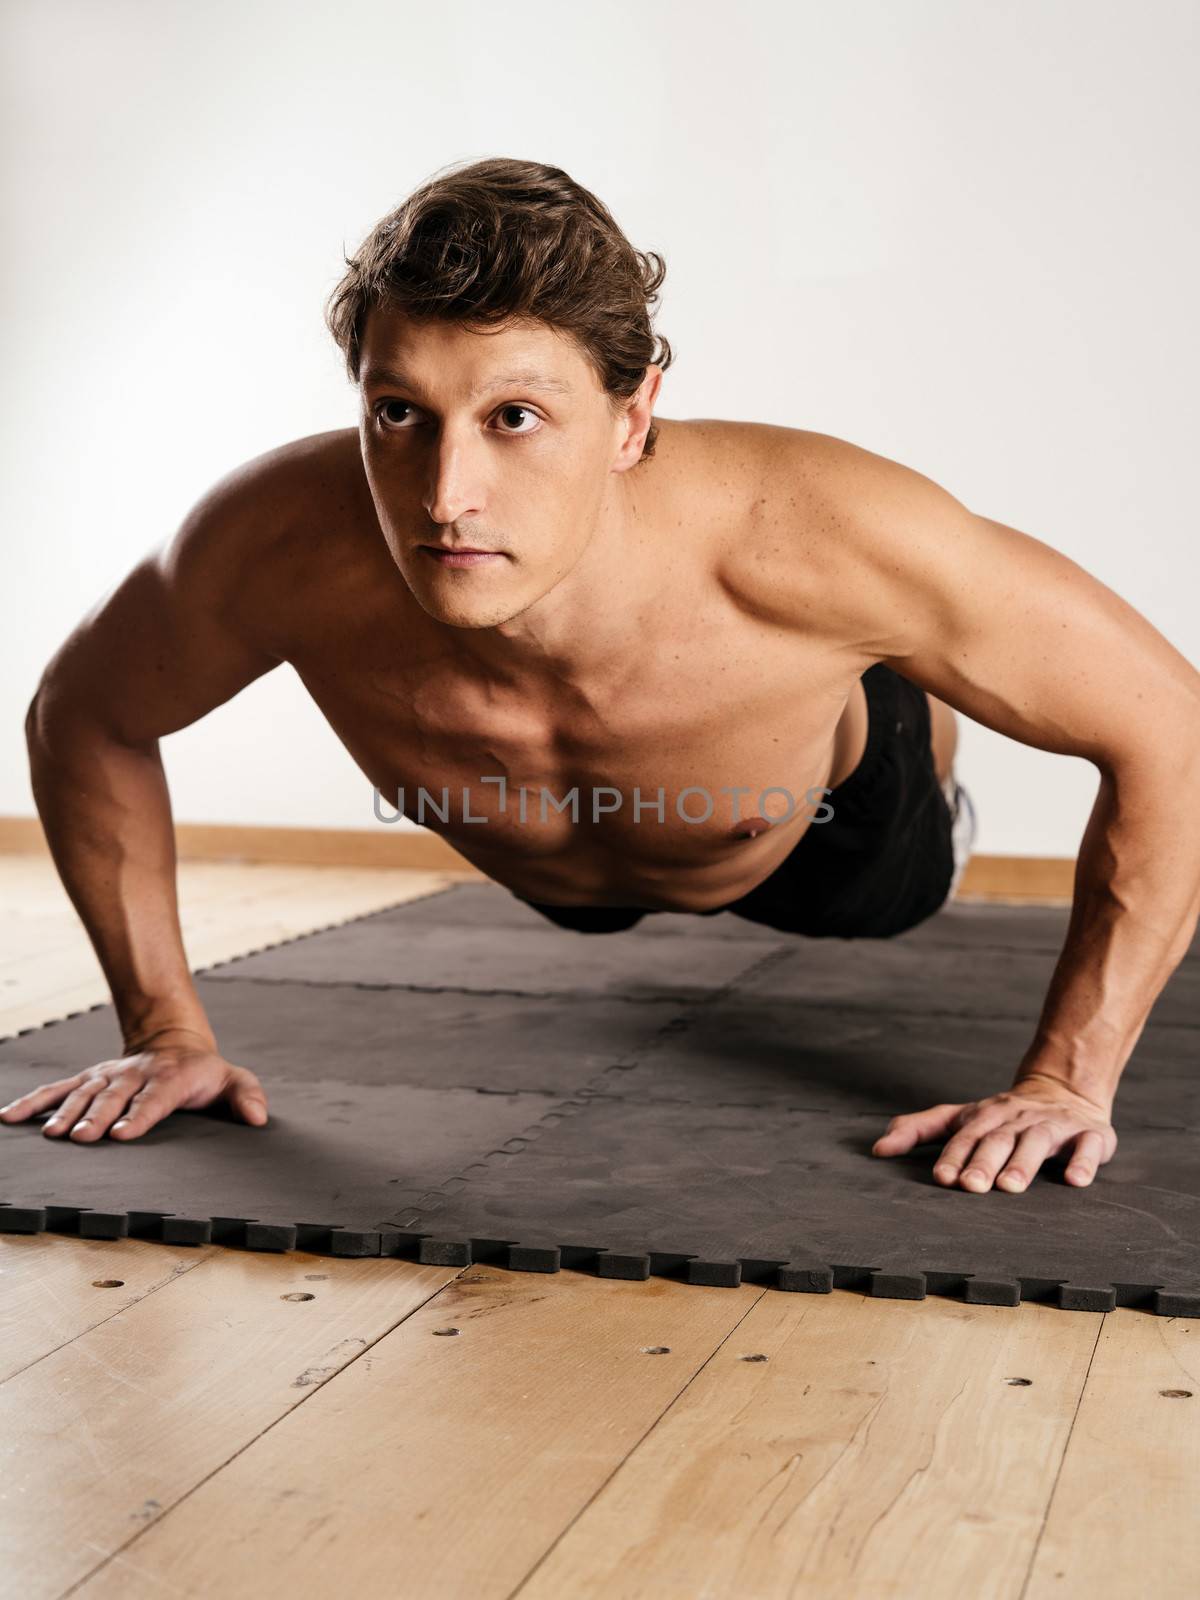 Photo of a man in his early thirties doing pushups on a mat in a fitness centre.
